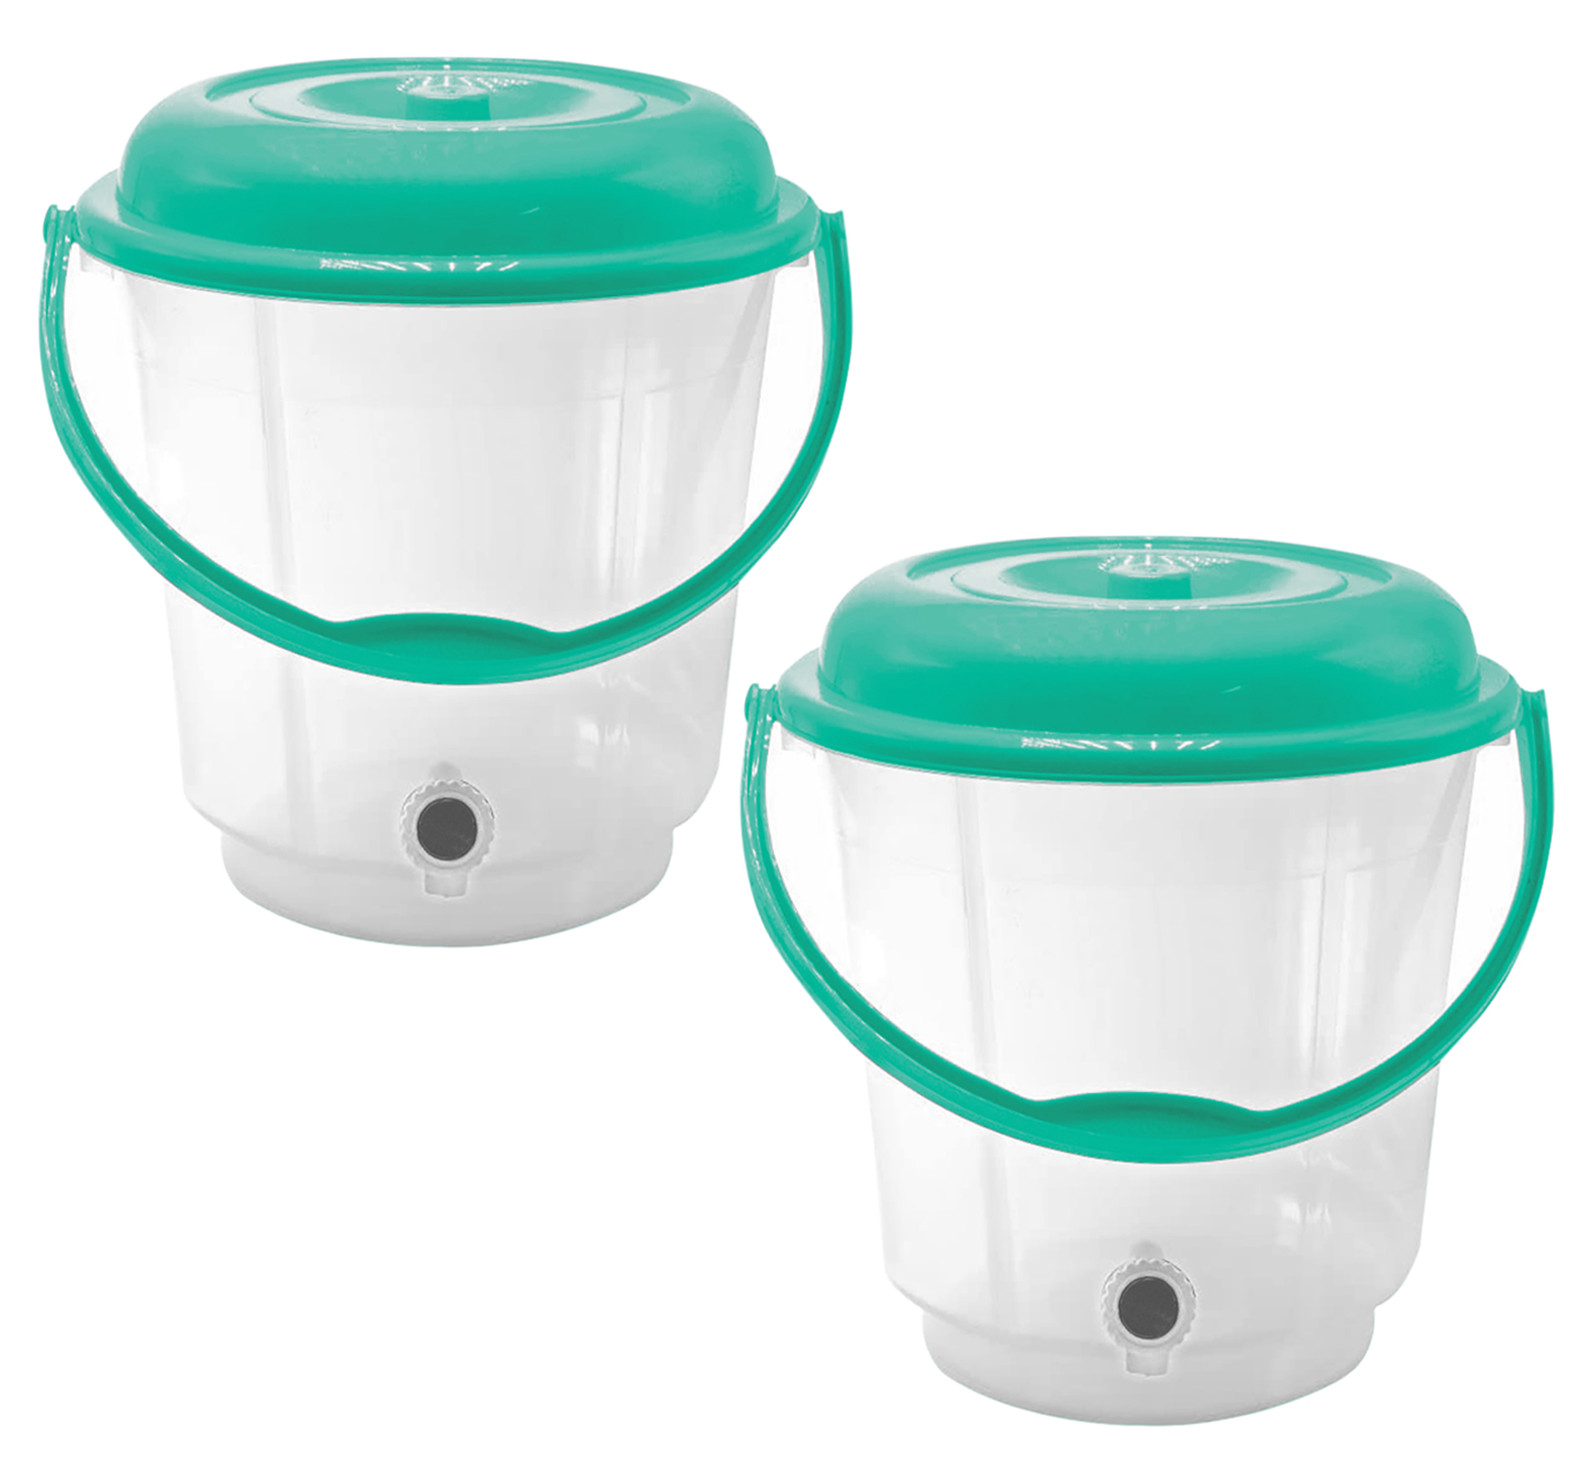 Kuber Industries Multipurposes Plastic Transparent Bucket With Lid & Tap System For Home Cleaning & Save Water, 18Ltr. (Green)